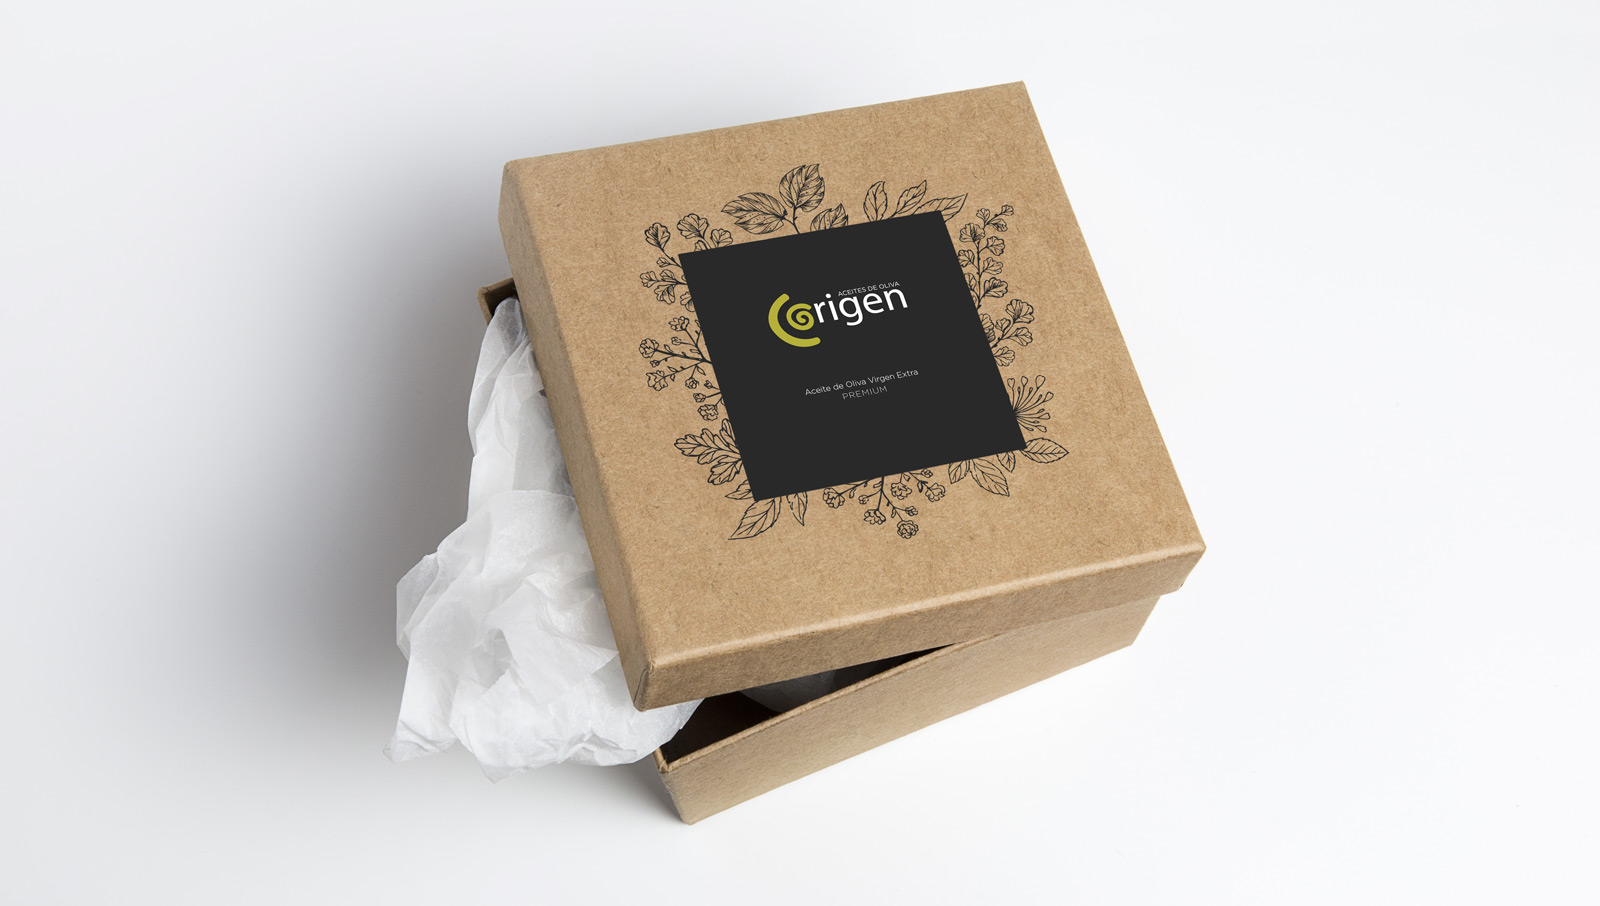 Graphic and creative design of extra virgin olive oil labels for ORIGEN PREMIUM